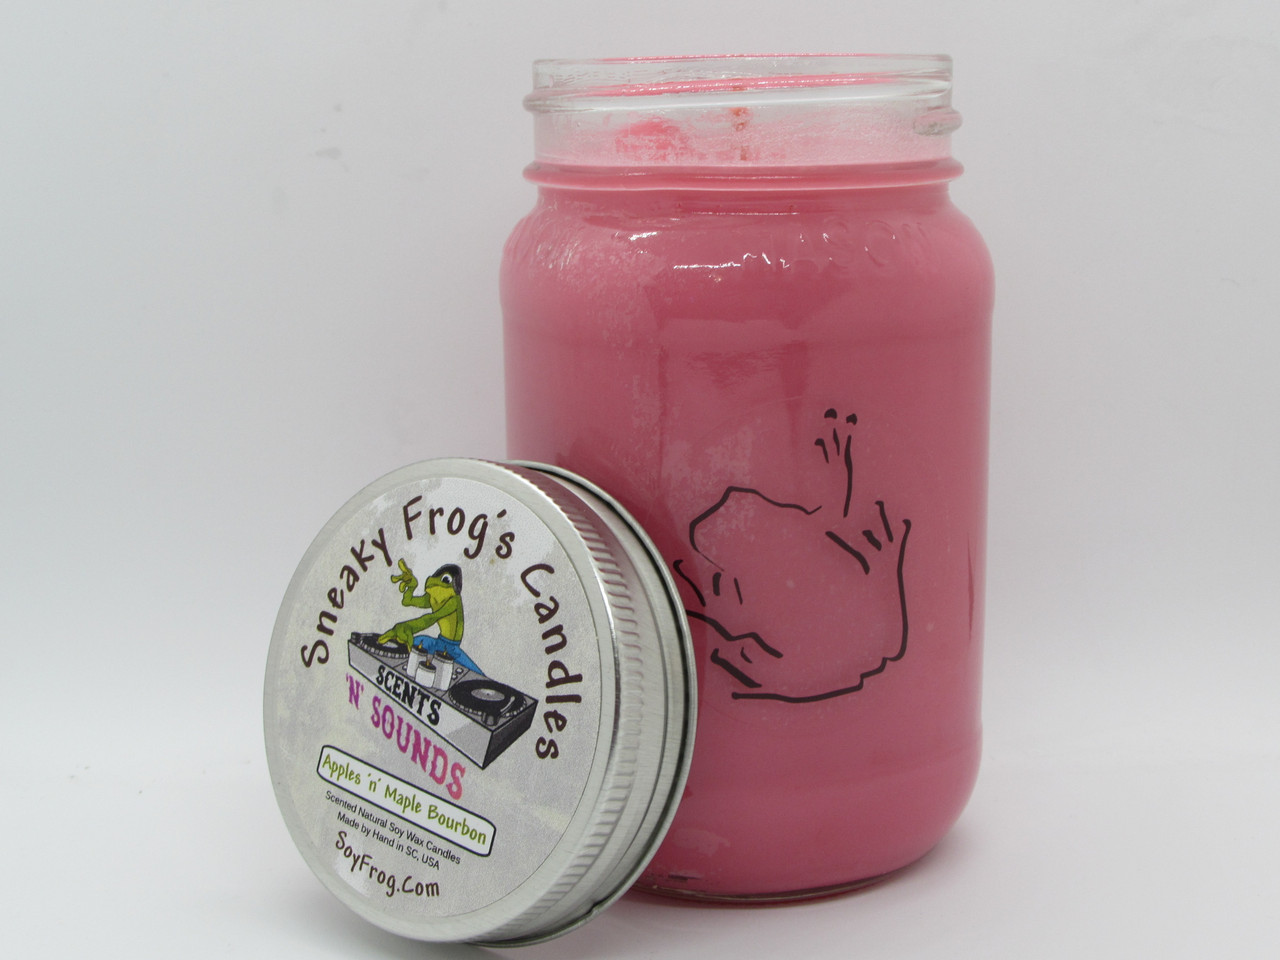 Apples 'n' Maple Bourbon - Scented Natural Soy Wax Candle - 16 Oz Mason Jar